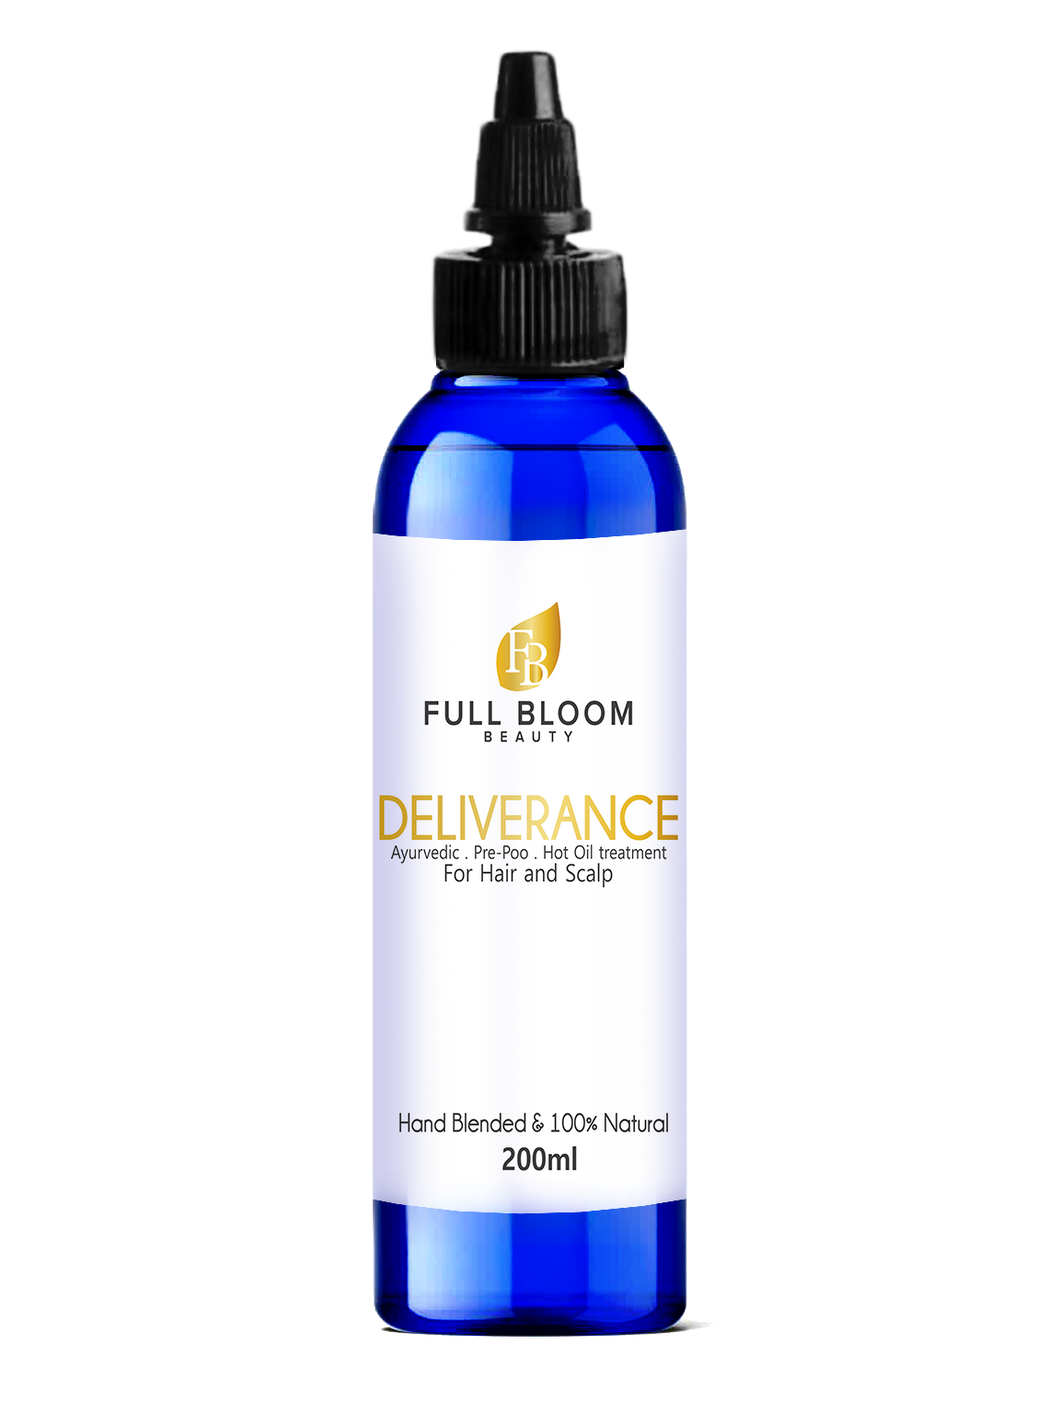 Deliverance - Ayuverdic Pre-Poo Oil for Hair and Scalp promotes Thicker Hair